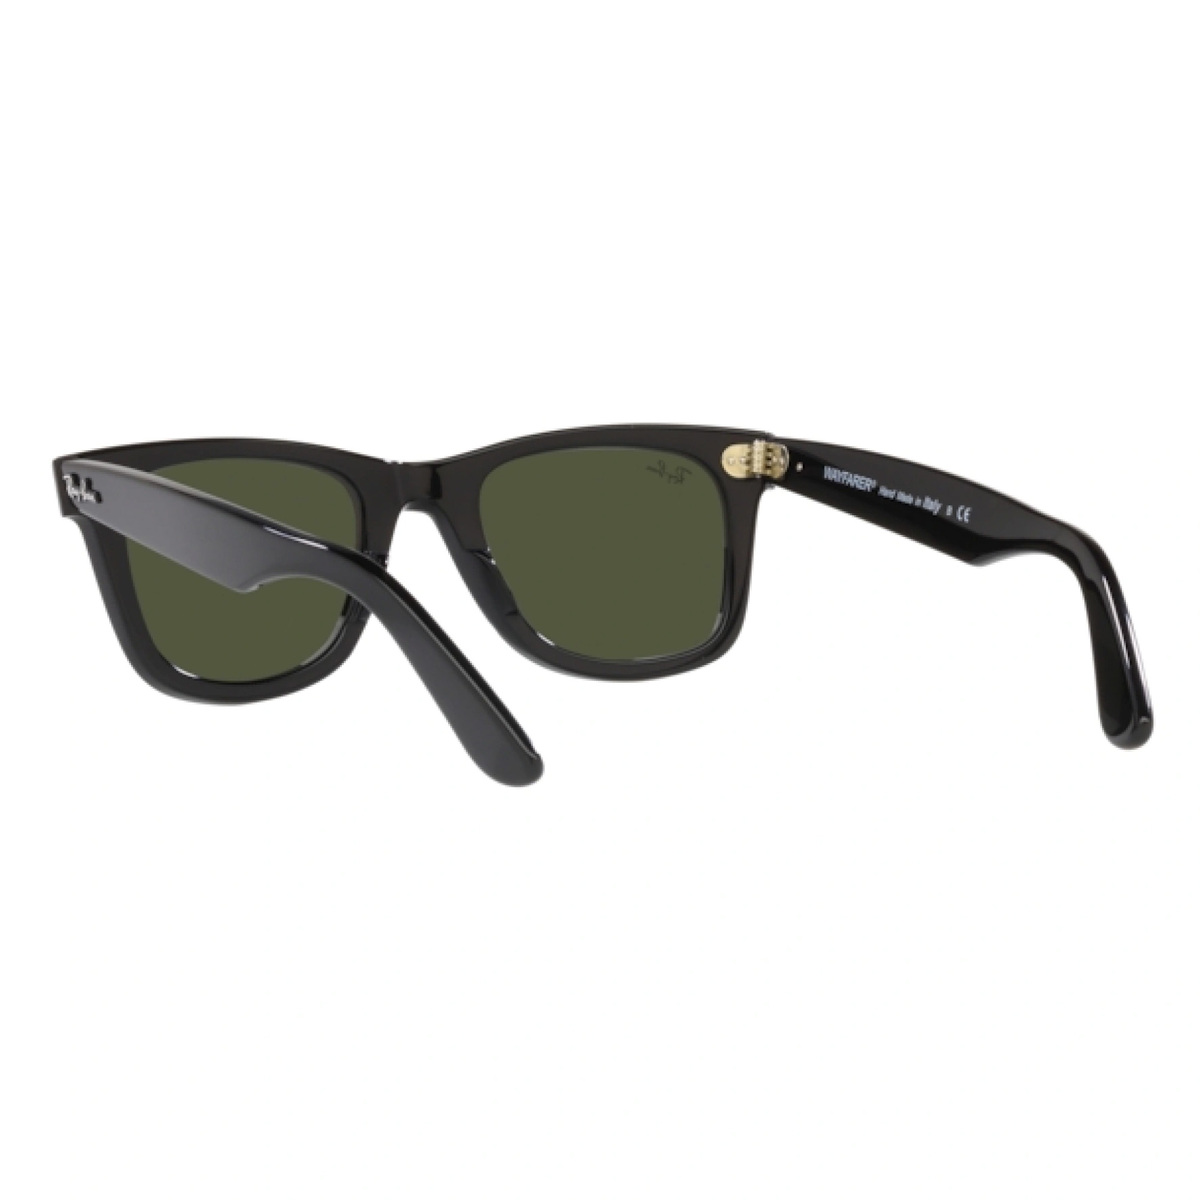 Rayban Men's Square Sunglass, Green, 2140 135831 Online at Best Price ...